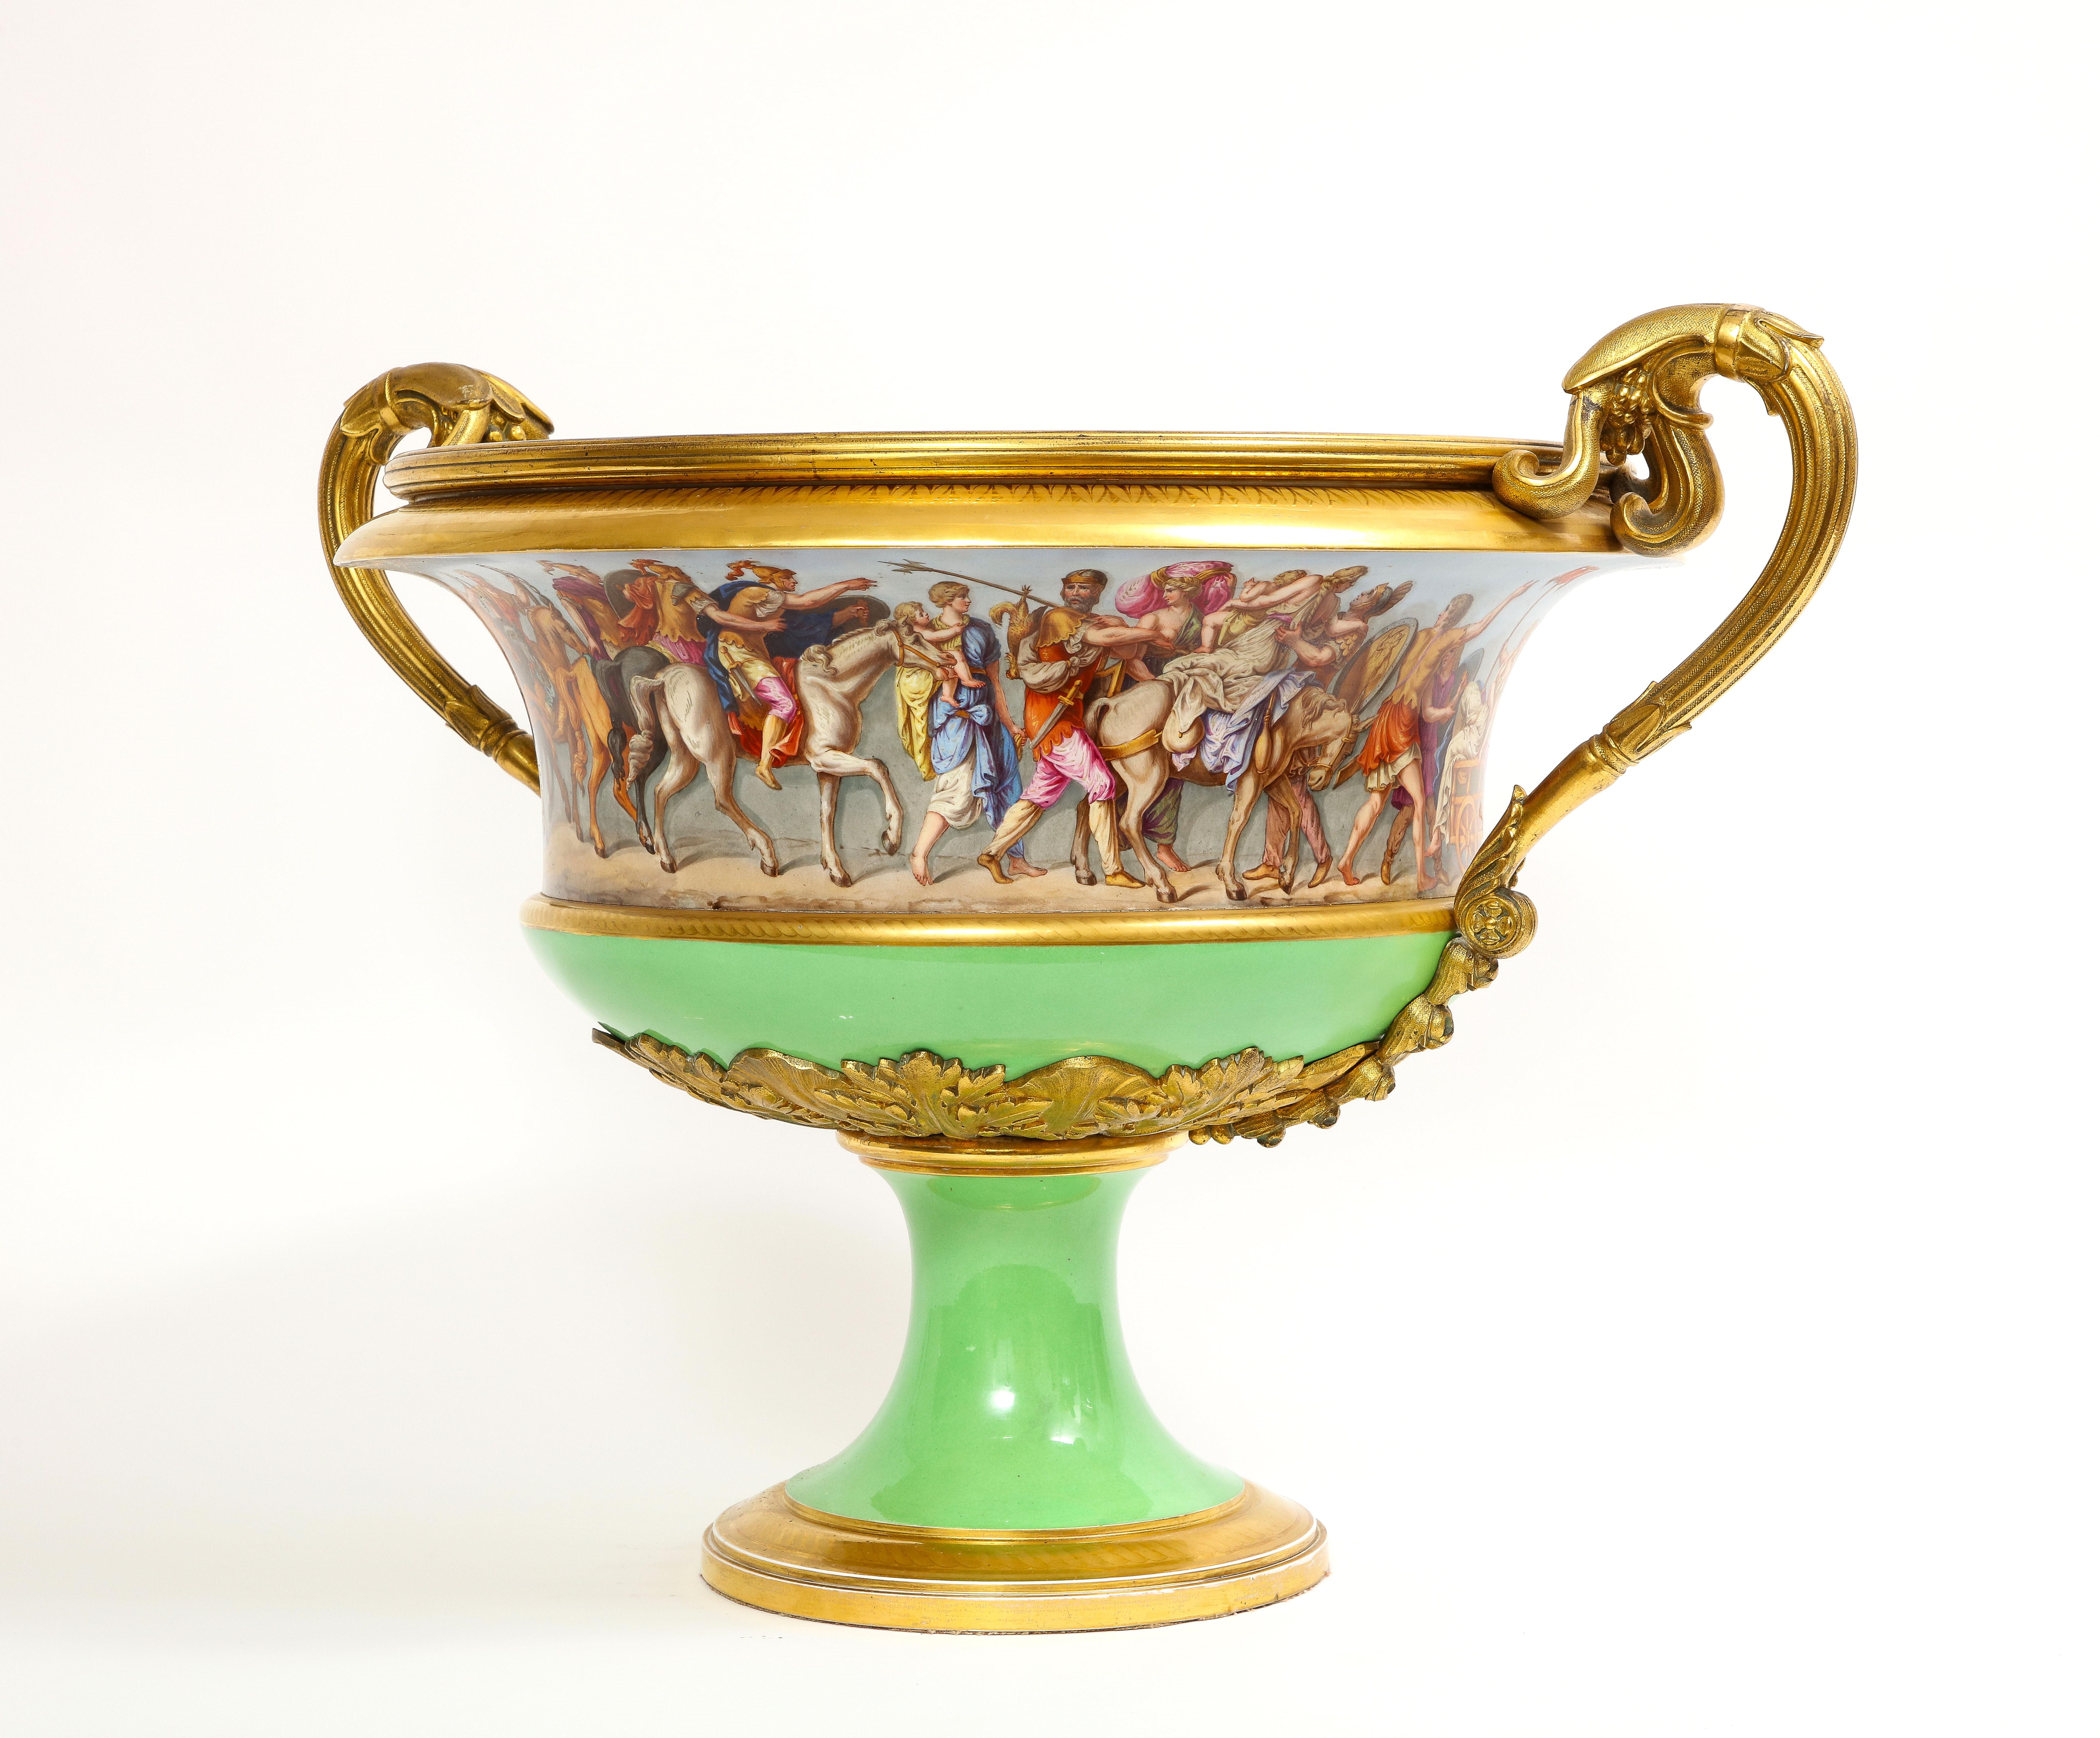 French Monumental Sevres Porcelain Ormolu-Mounted 2-Handle Campana Form Centerpiece For Sale